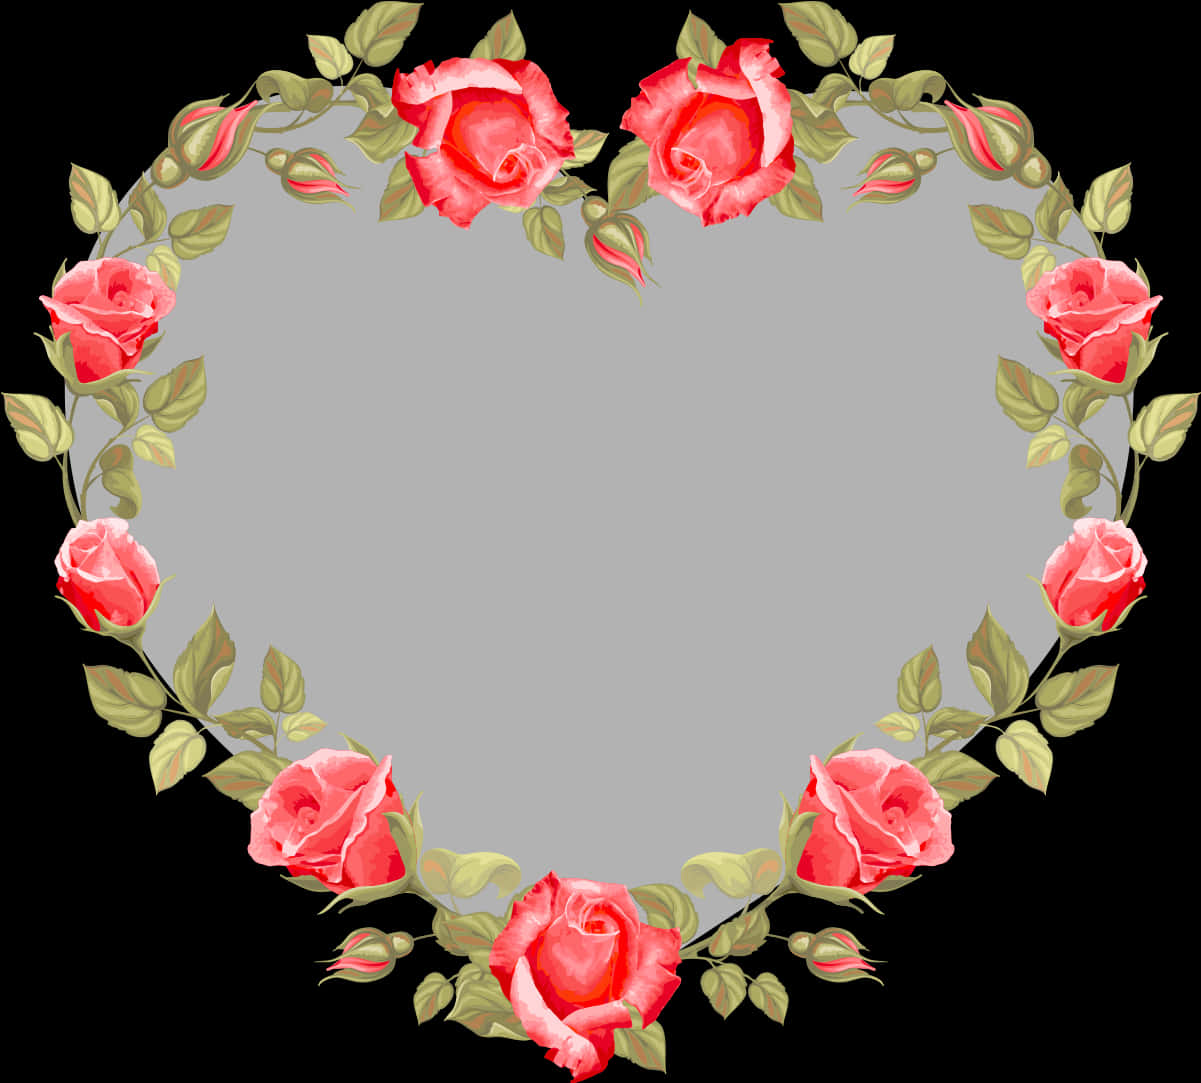 A Heart Shaped Frame Made Of Roses